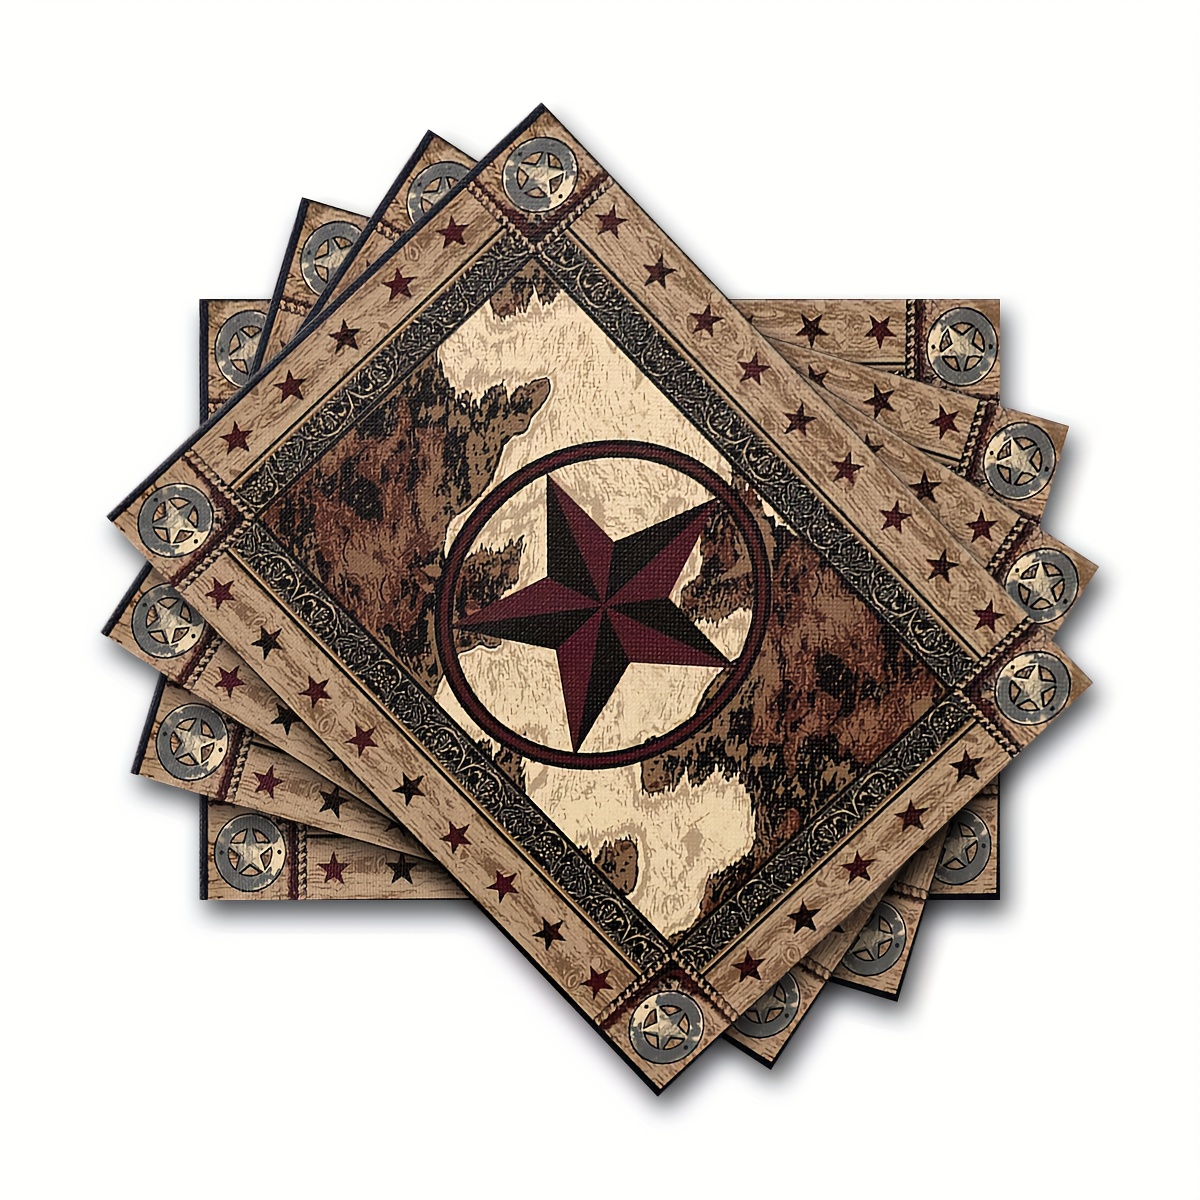 

4pcs, Table Pads, Western Texas Star Placemats For Dining Table, Rustic Vintage Place Mats For Kitchen, Non Slip, Durable, Washable Table Mats, Room Decor